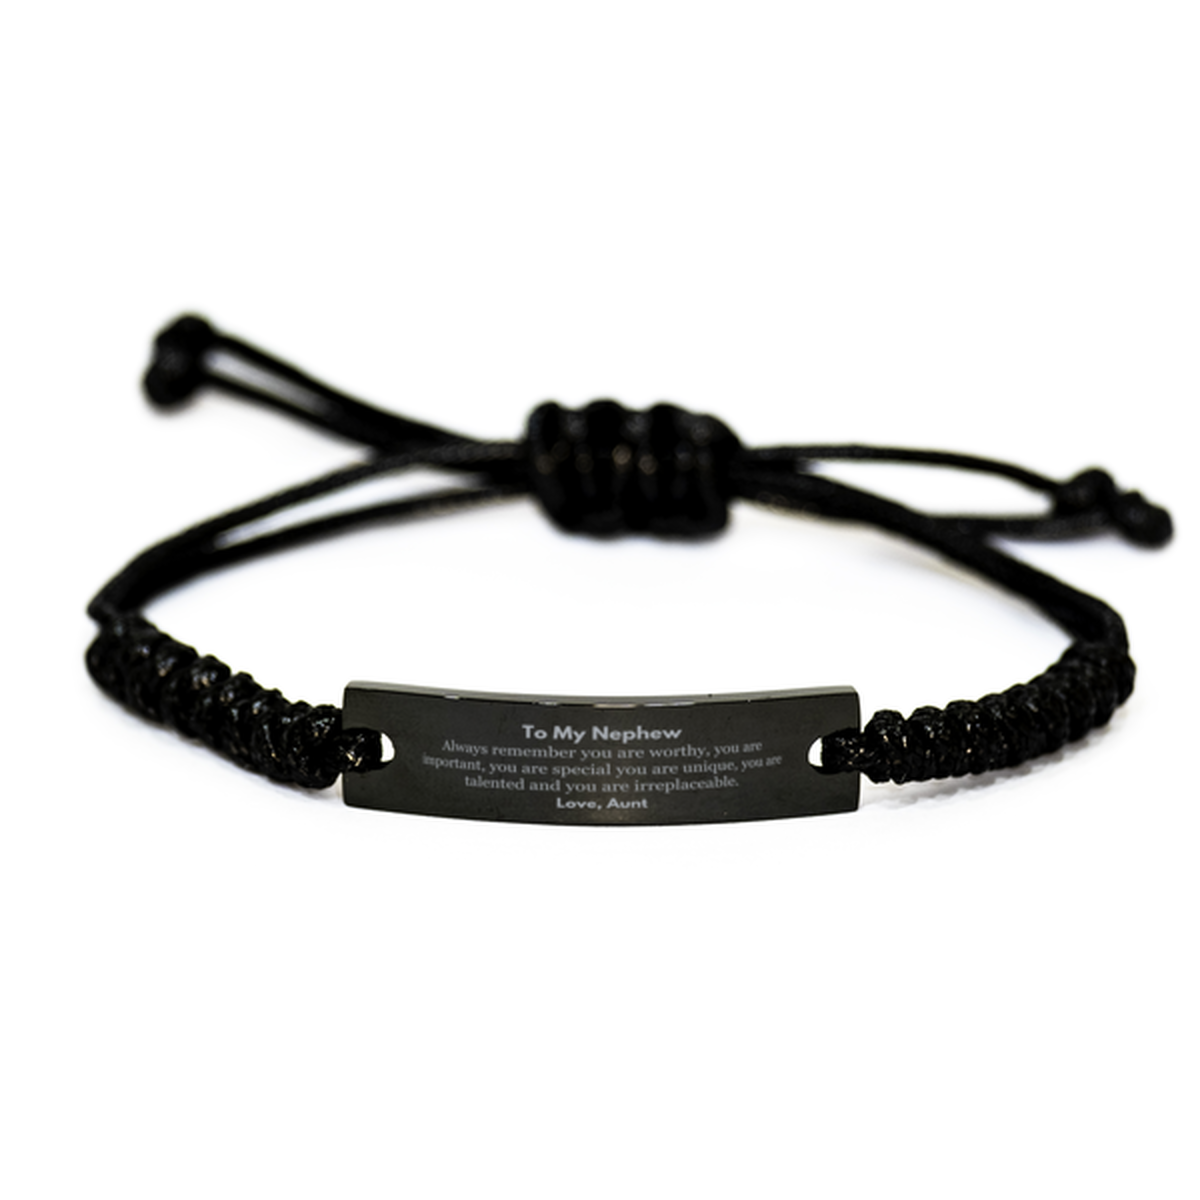 Nephew Birthday Gifts from Aunt, Inspirational Black Rope Bracelet for Nephew Christmas Graduation Gifts for Nephew Always remember you are worthy, you are important. Love, Aunt